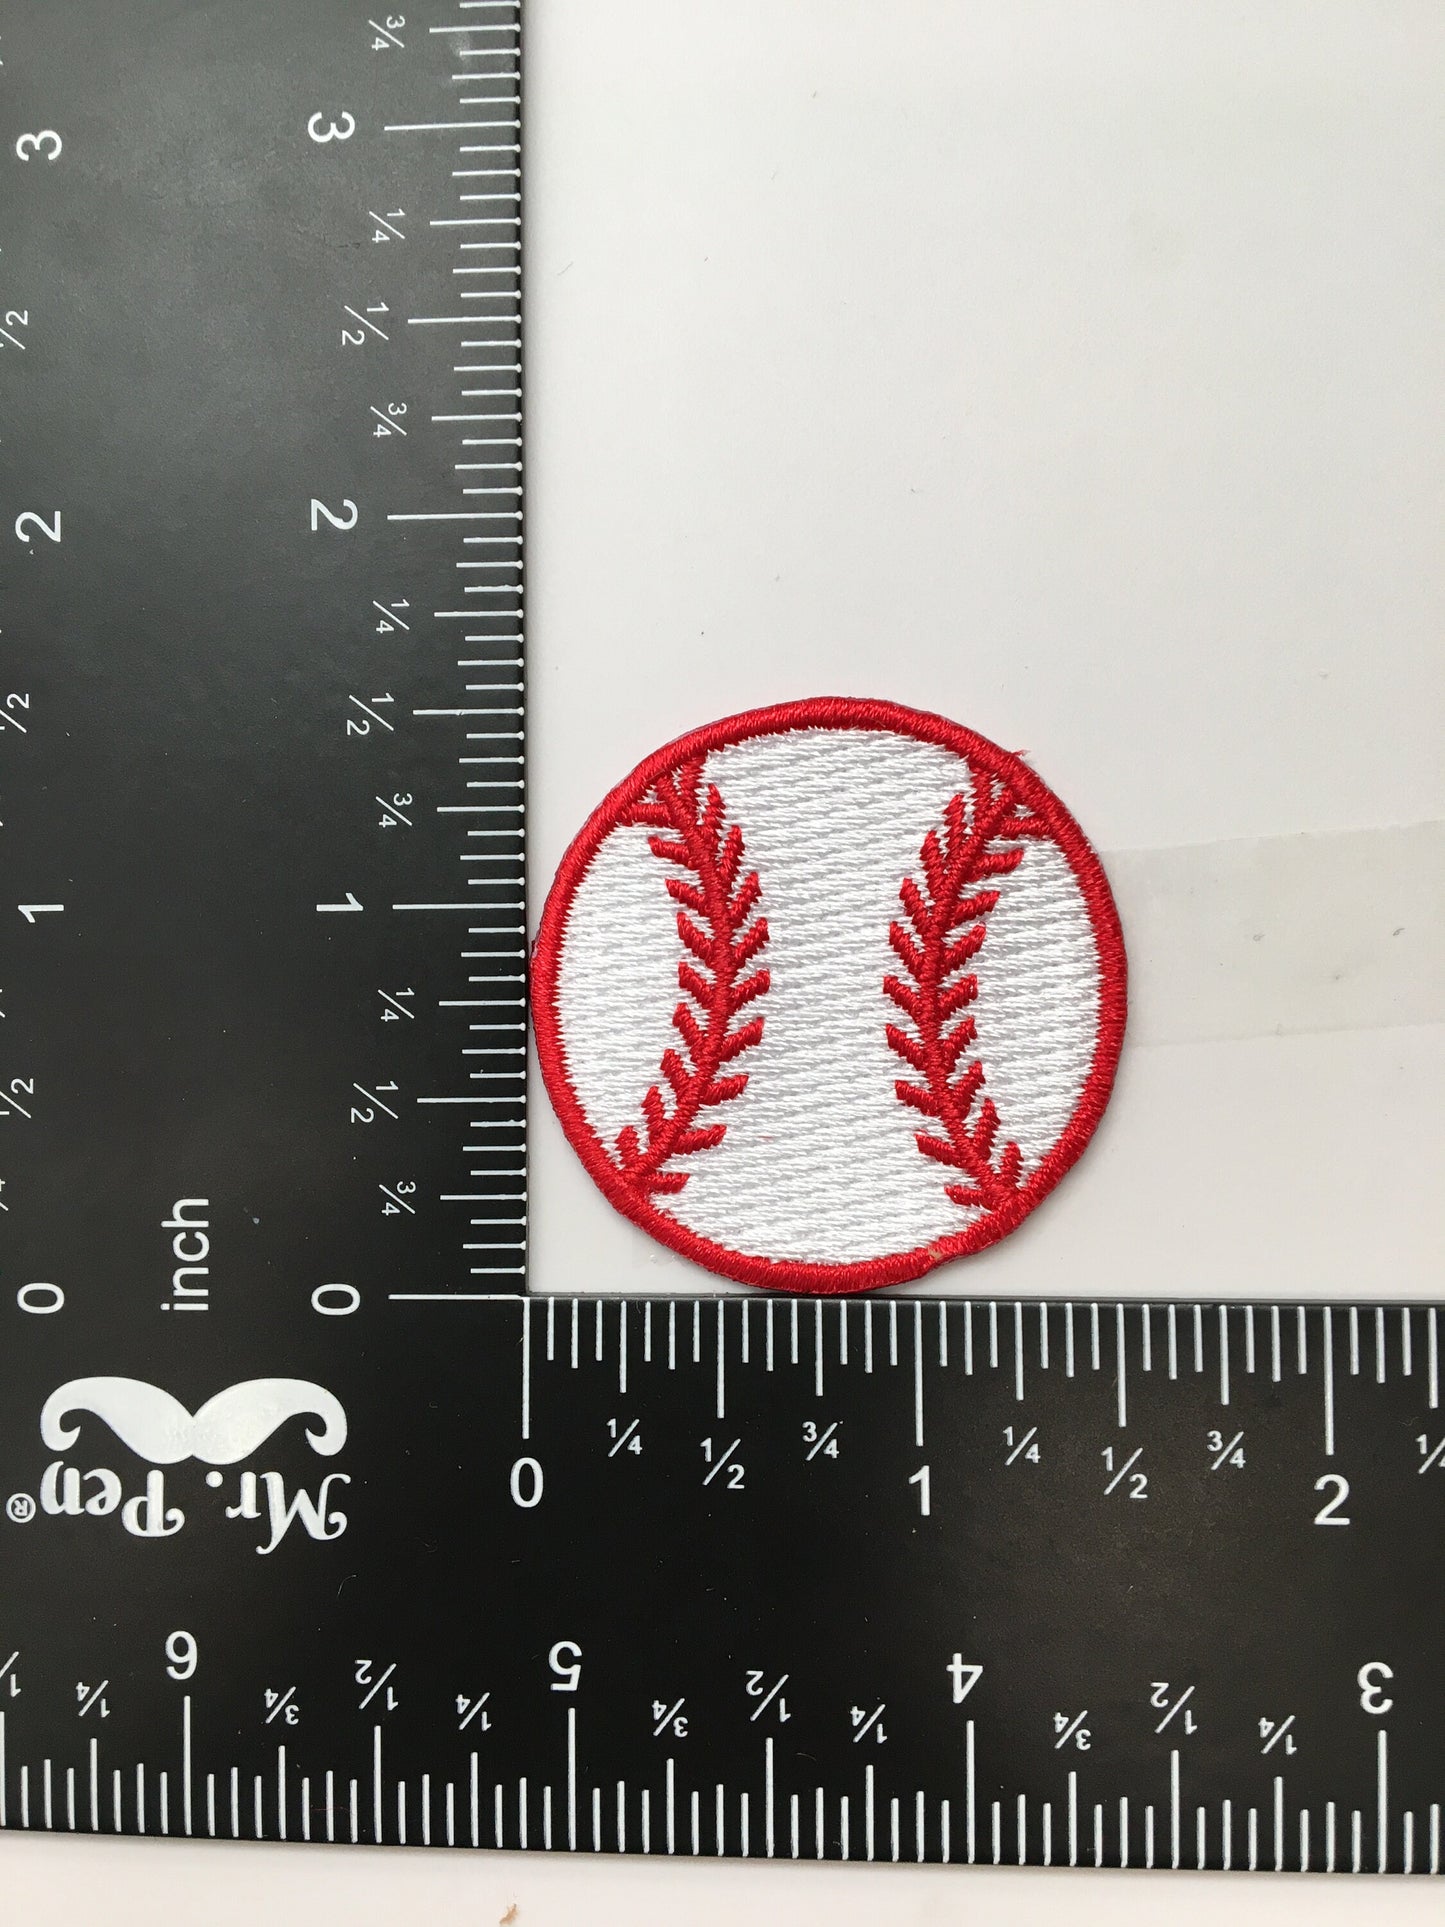 Baseball - 1.5" - Sports Ball - Embroidered Patch - Iron on Applique - WA229